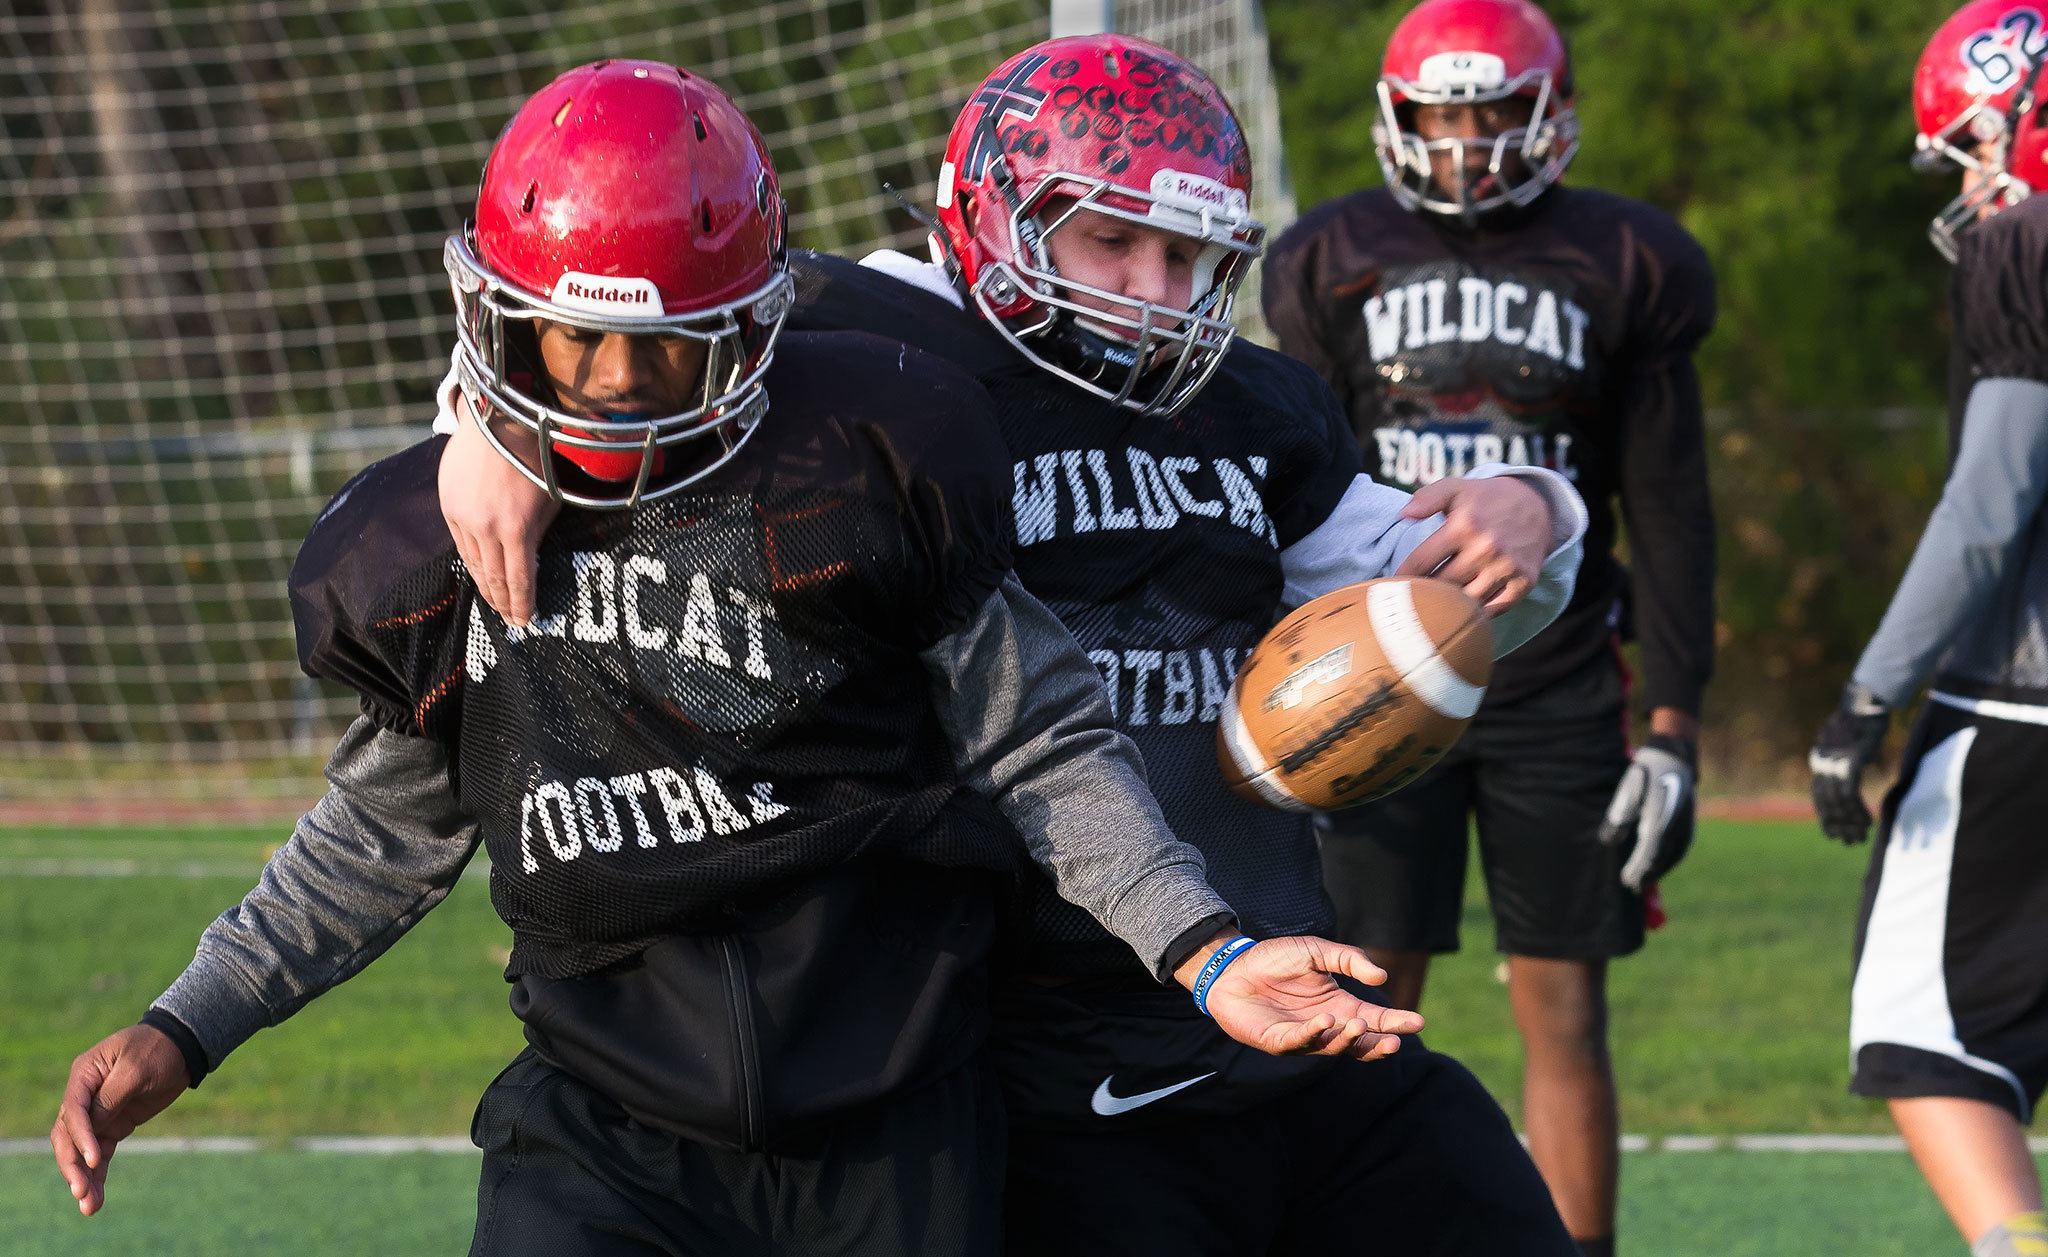 Junior linebacker Ben Hines (middle) strips the ball from teammate Fredrico Girault as Archbishop Murphy football players go through defensive drills on Thursday in Everett. (Andy Bronson / The Herald)